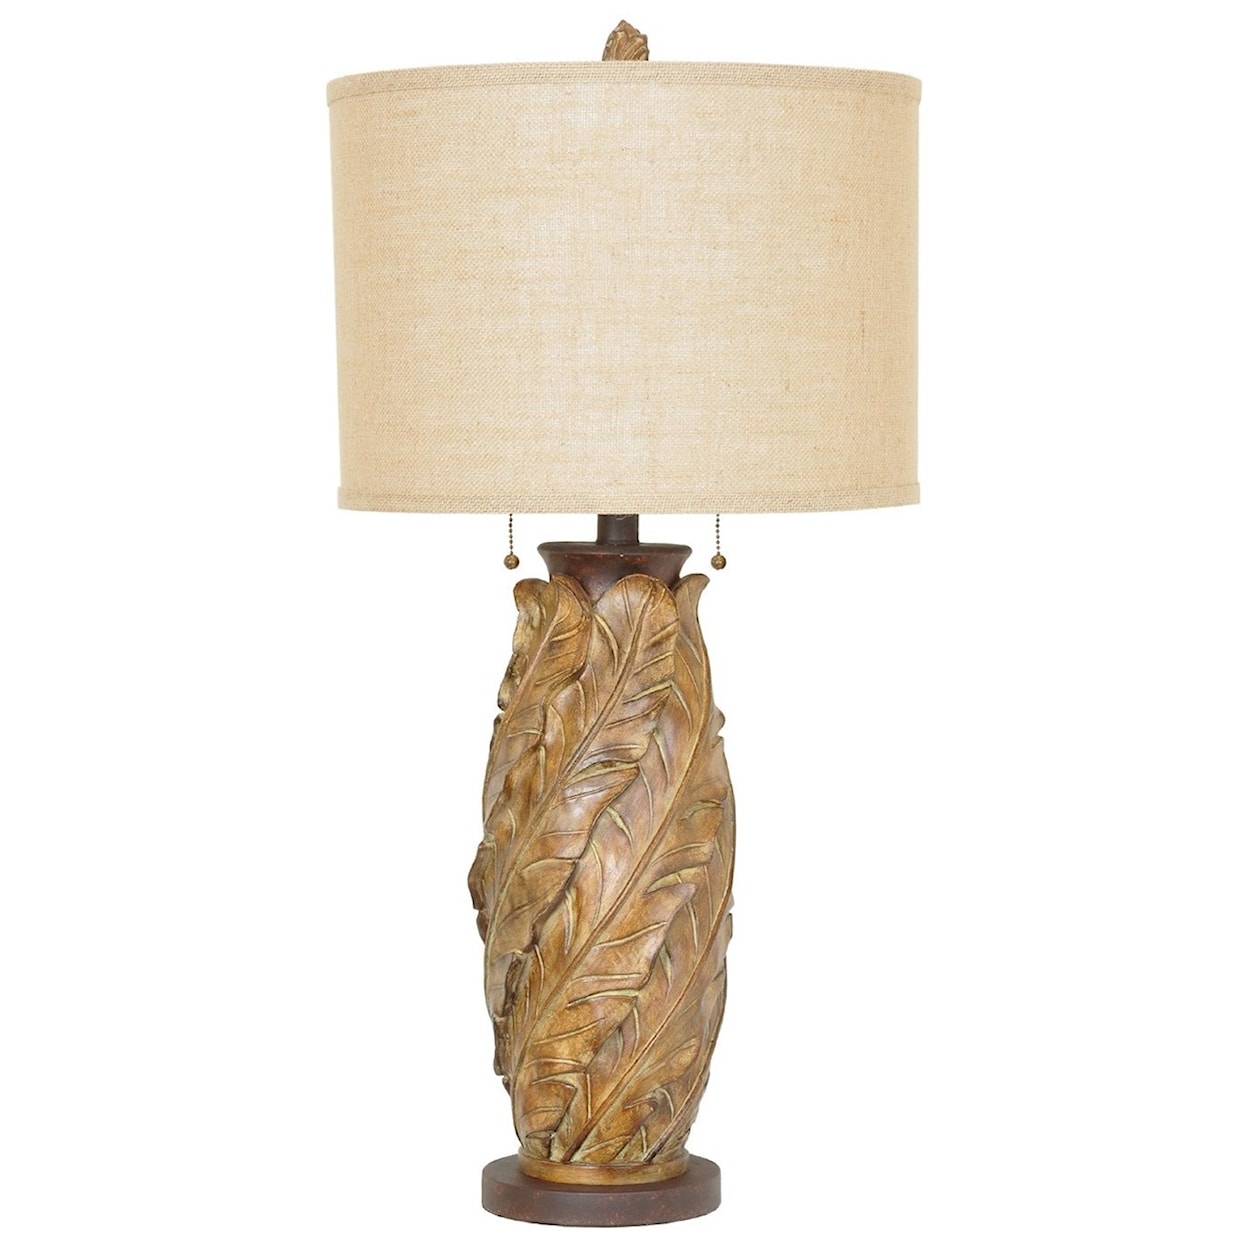 Crestview Collection Lighting Banana Leaf Table Lamp